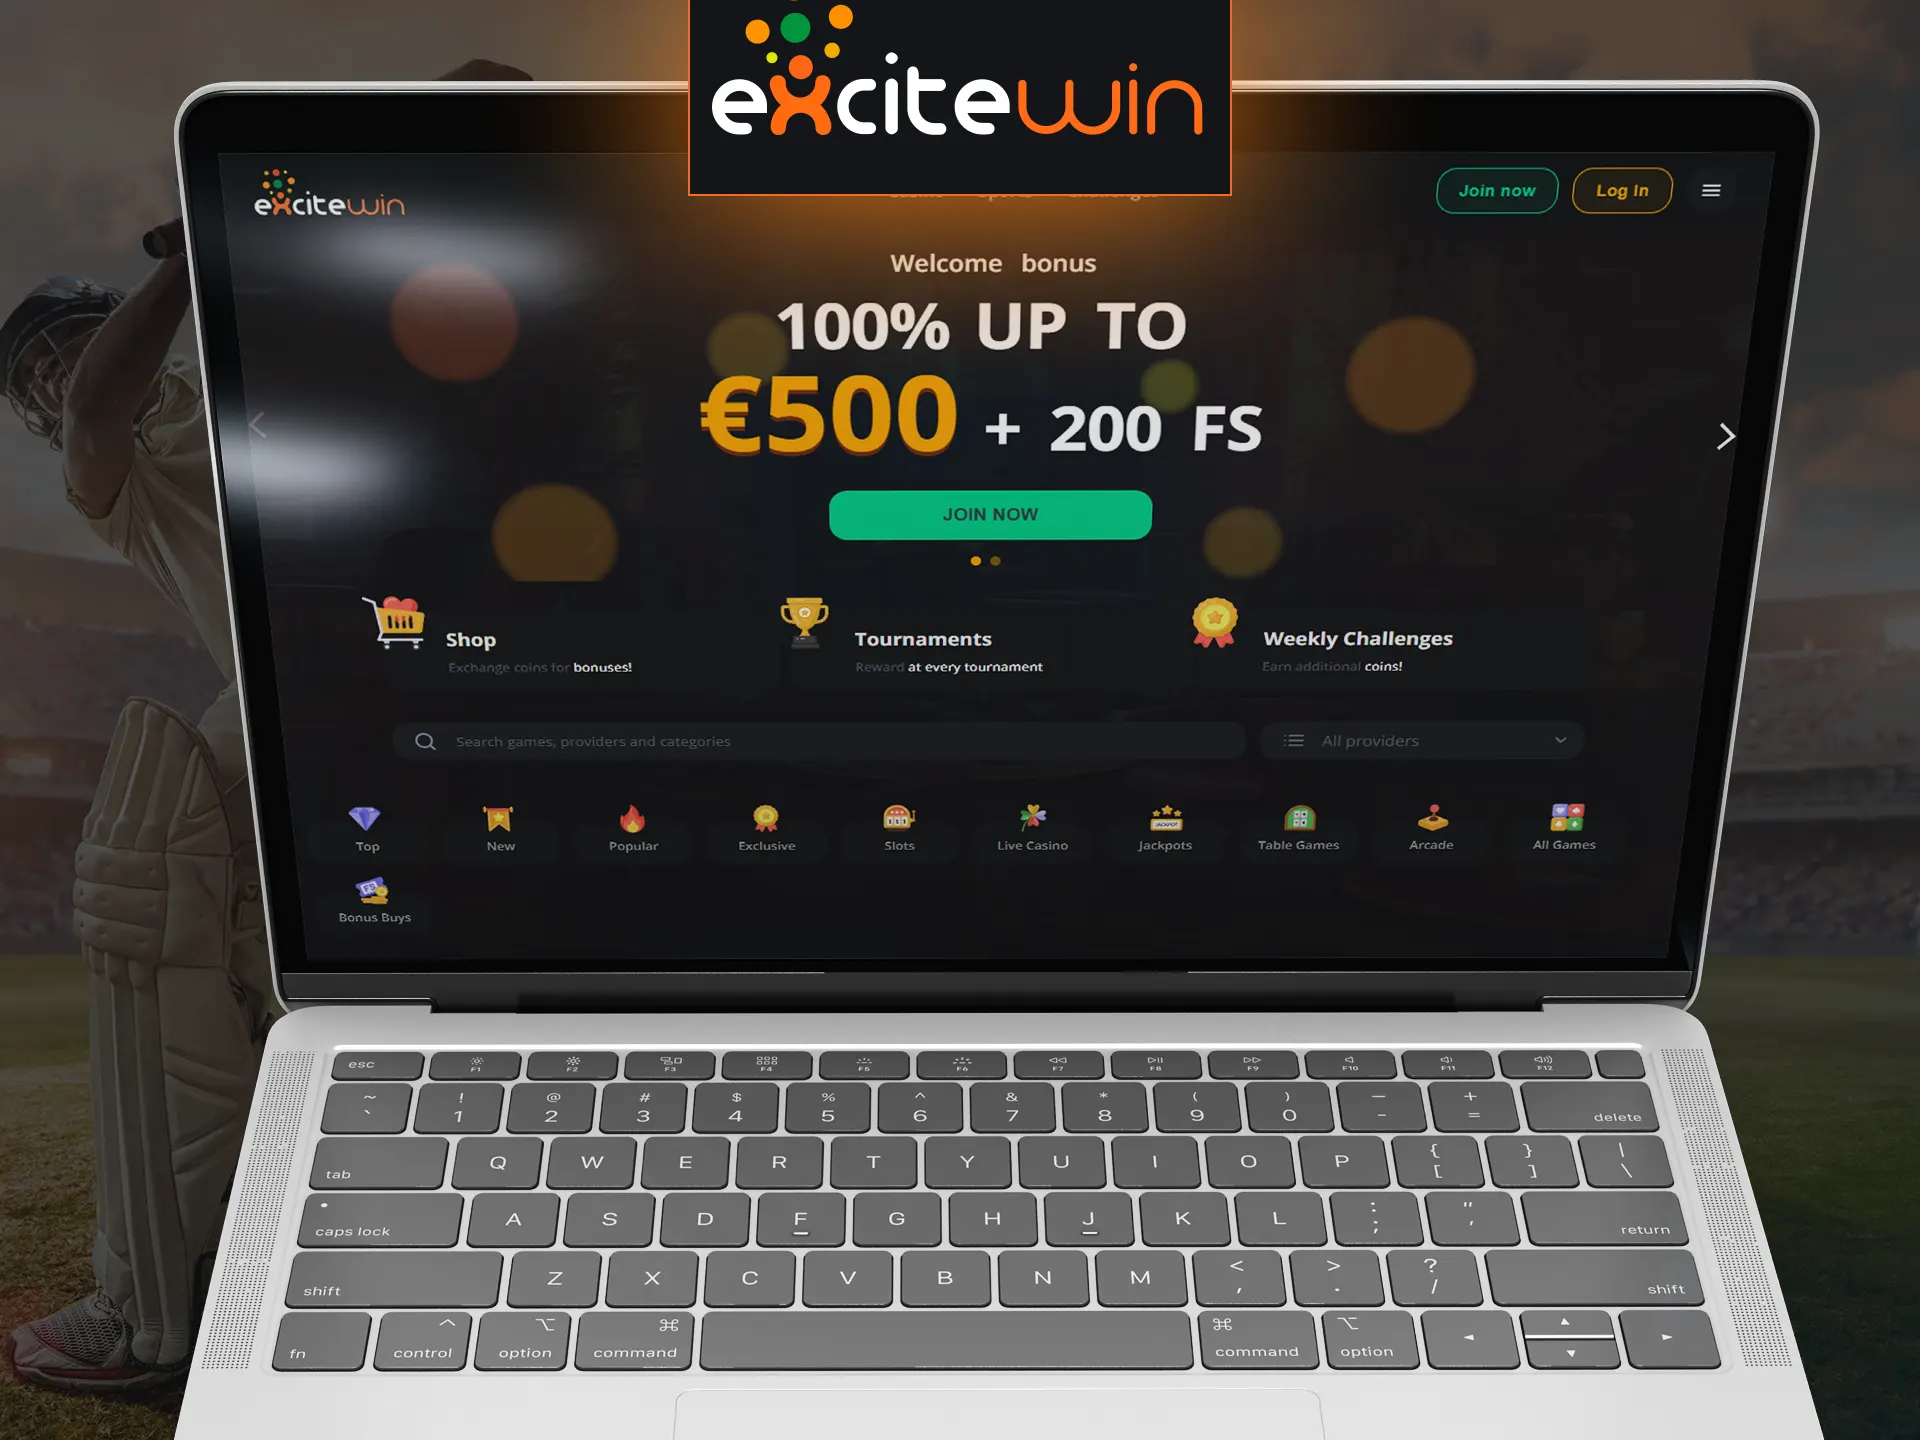 Visit Excitewin's official website.